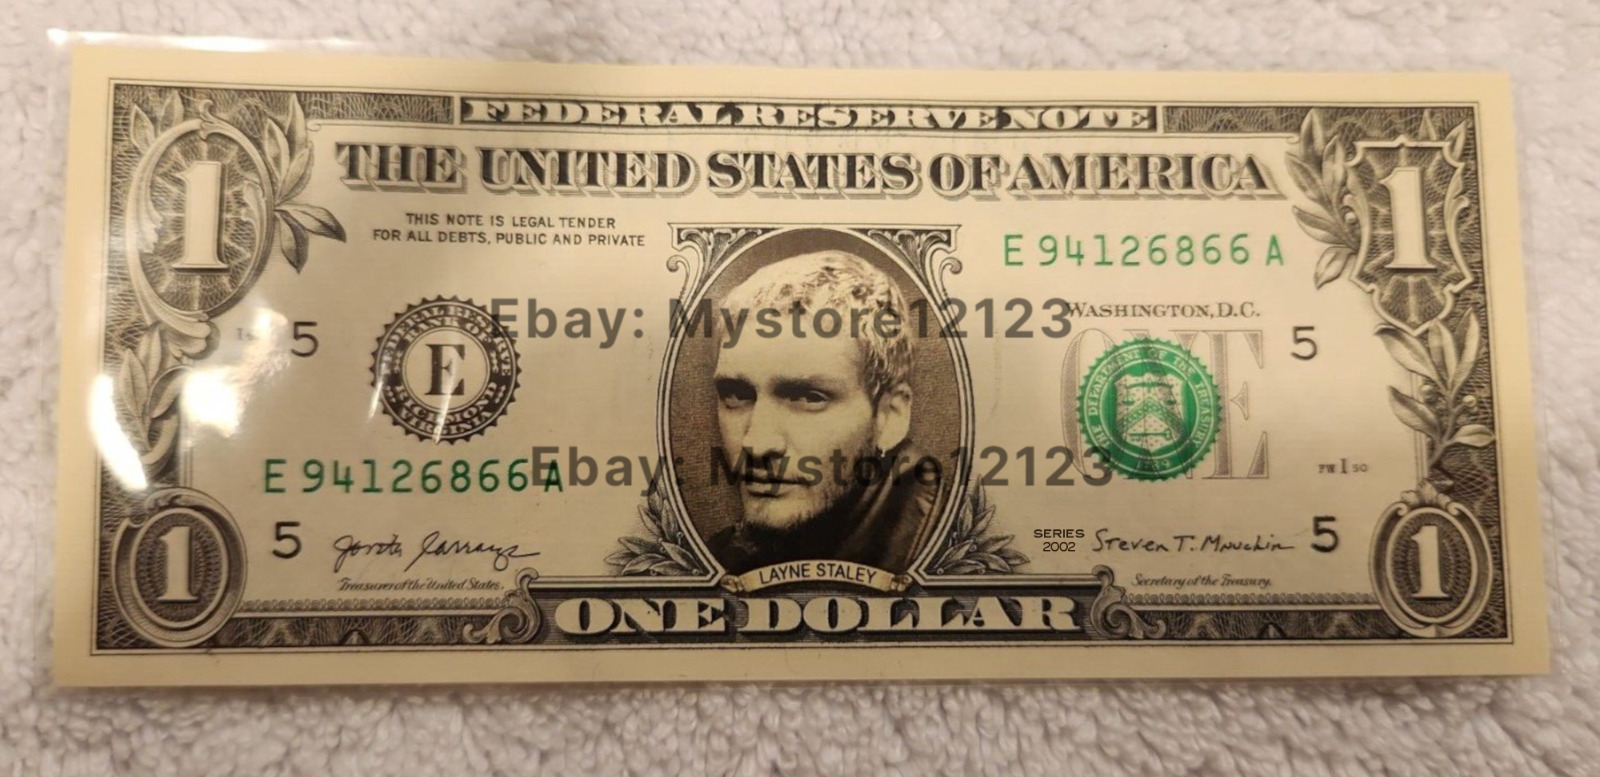 Layne Staley $1 Dollar Bill, Rare, Limited ed., Mint condition. Alice in Chains.